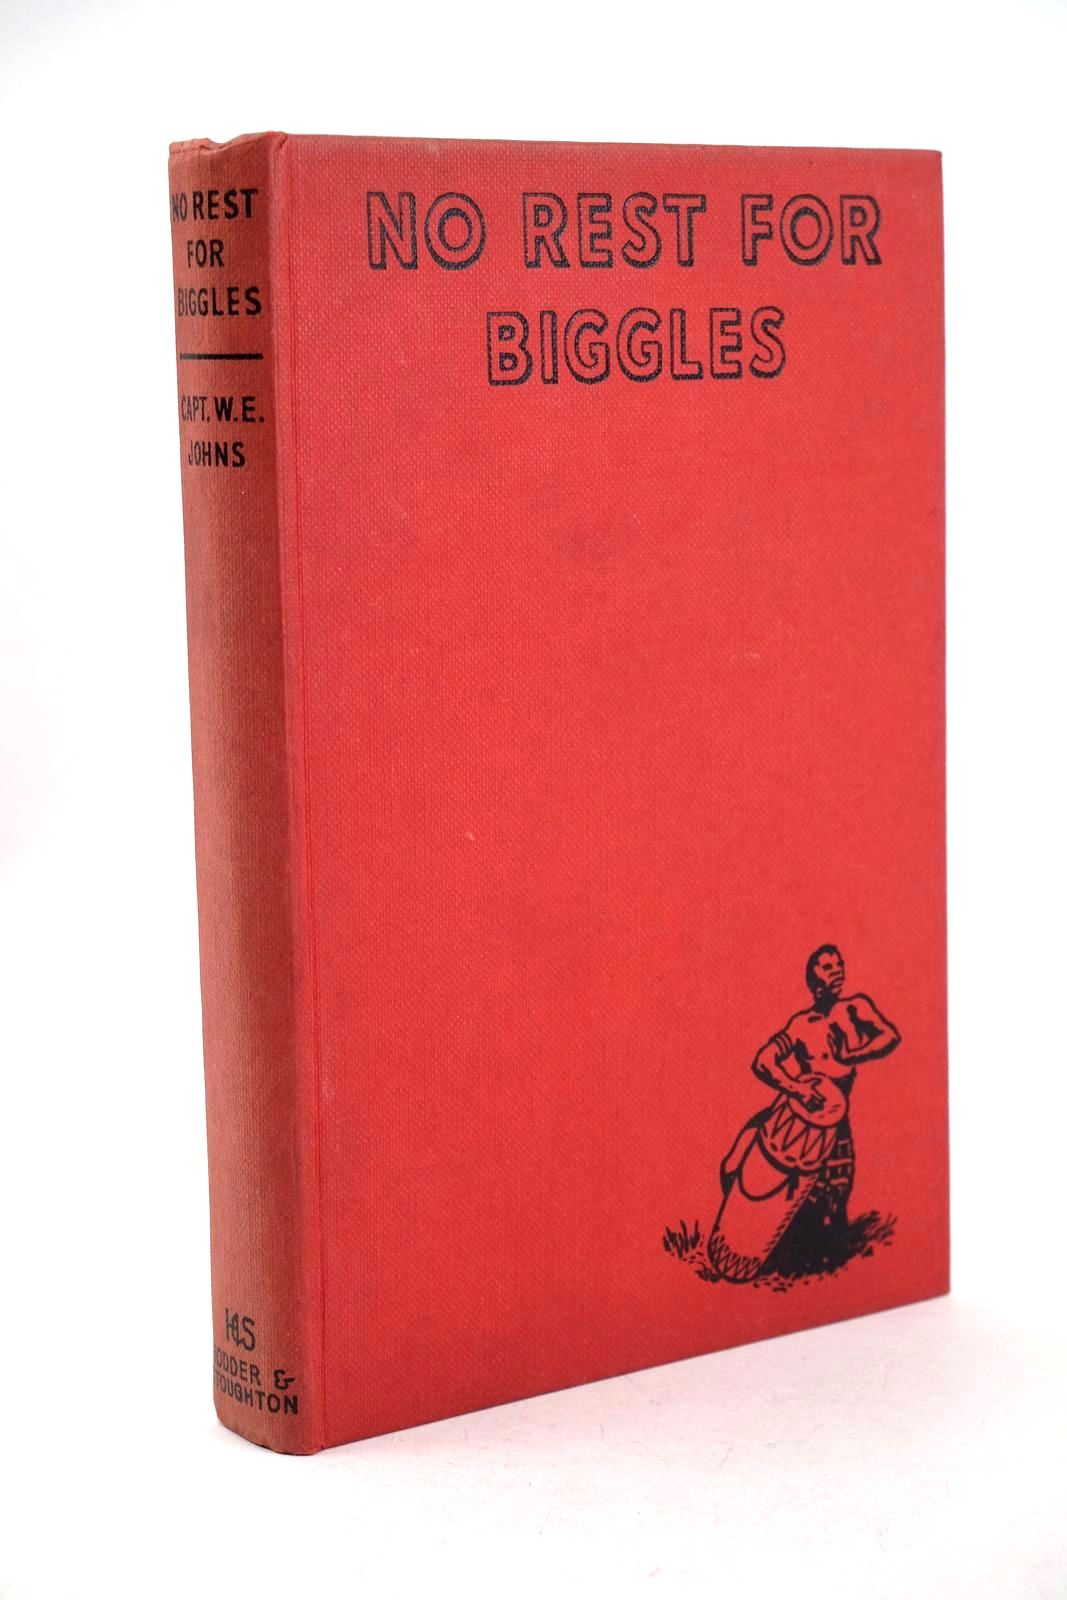 Photo of NO REST FOR BIGGLES written by Johns, W.E. illustrated by Stead,  published by Hodder &amp; Stoughton (STOCK CODE: 1326554)  for sale by Stella & Rose's Books